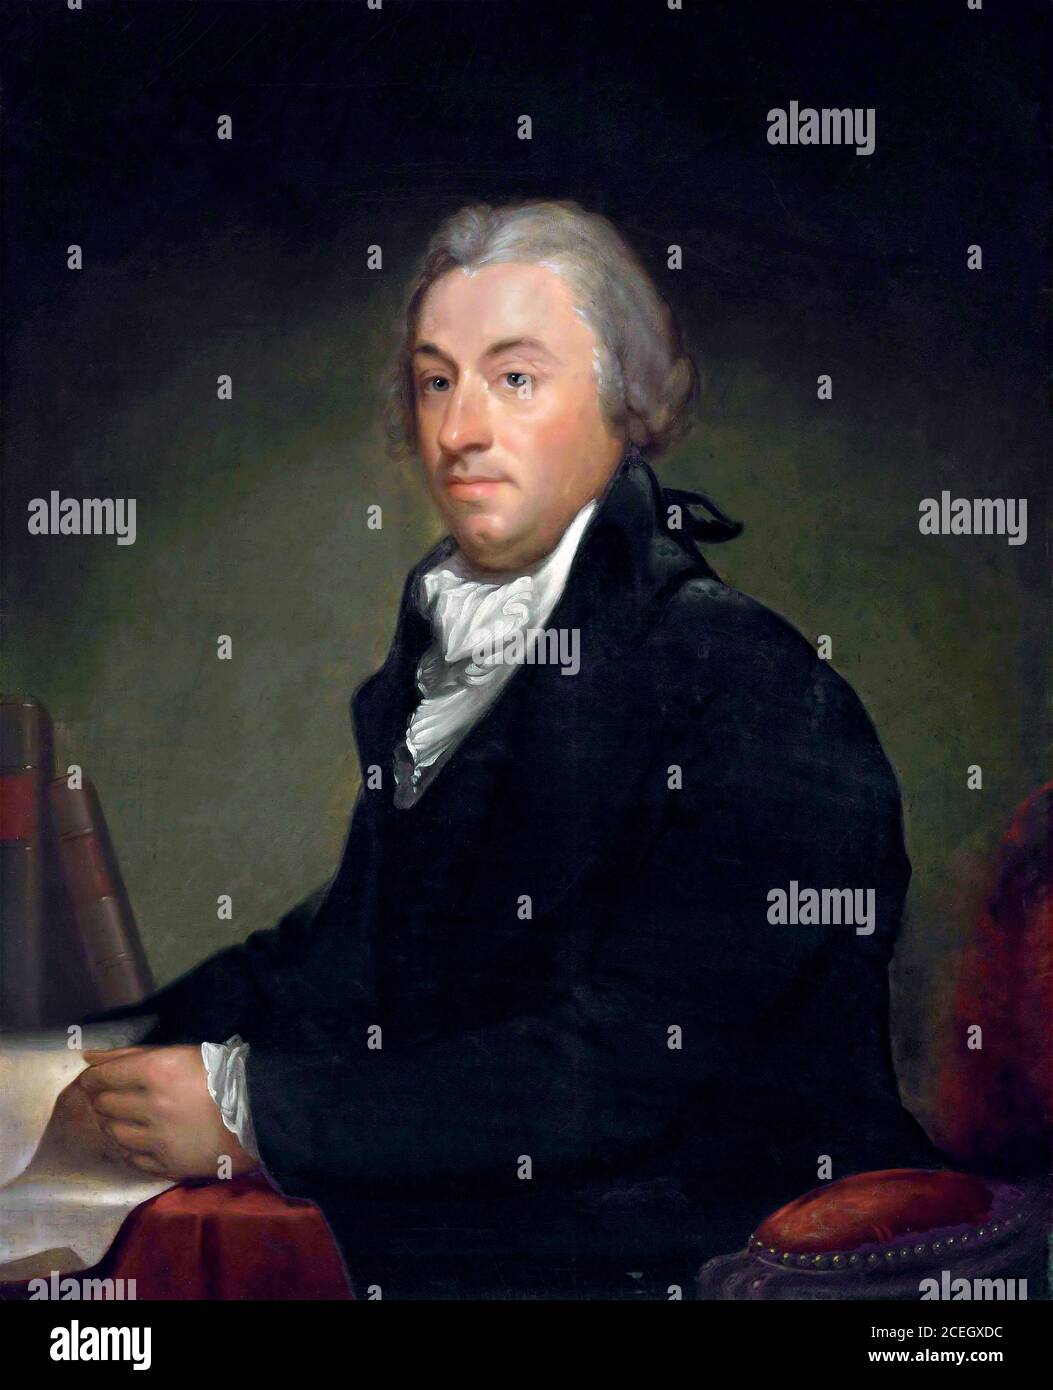 Robert Livingston (1746-1813), portrait attributed to Gilbert Stuart. Livingston was an American lawyer, politician and diplomat , who was a Founding Father of the United States and also signatory of the Lousiana Purchase in 1803, whilst US Minister to France. Stock Photo